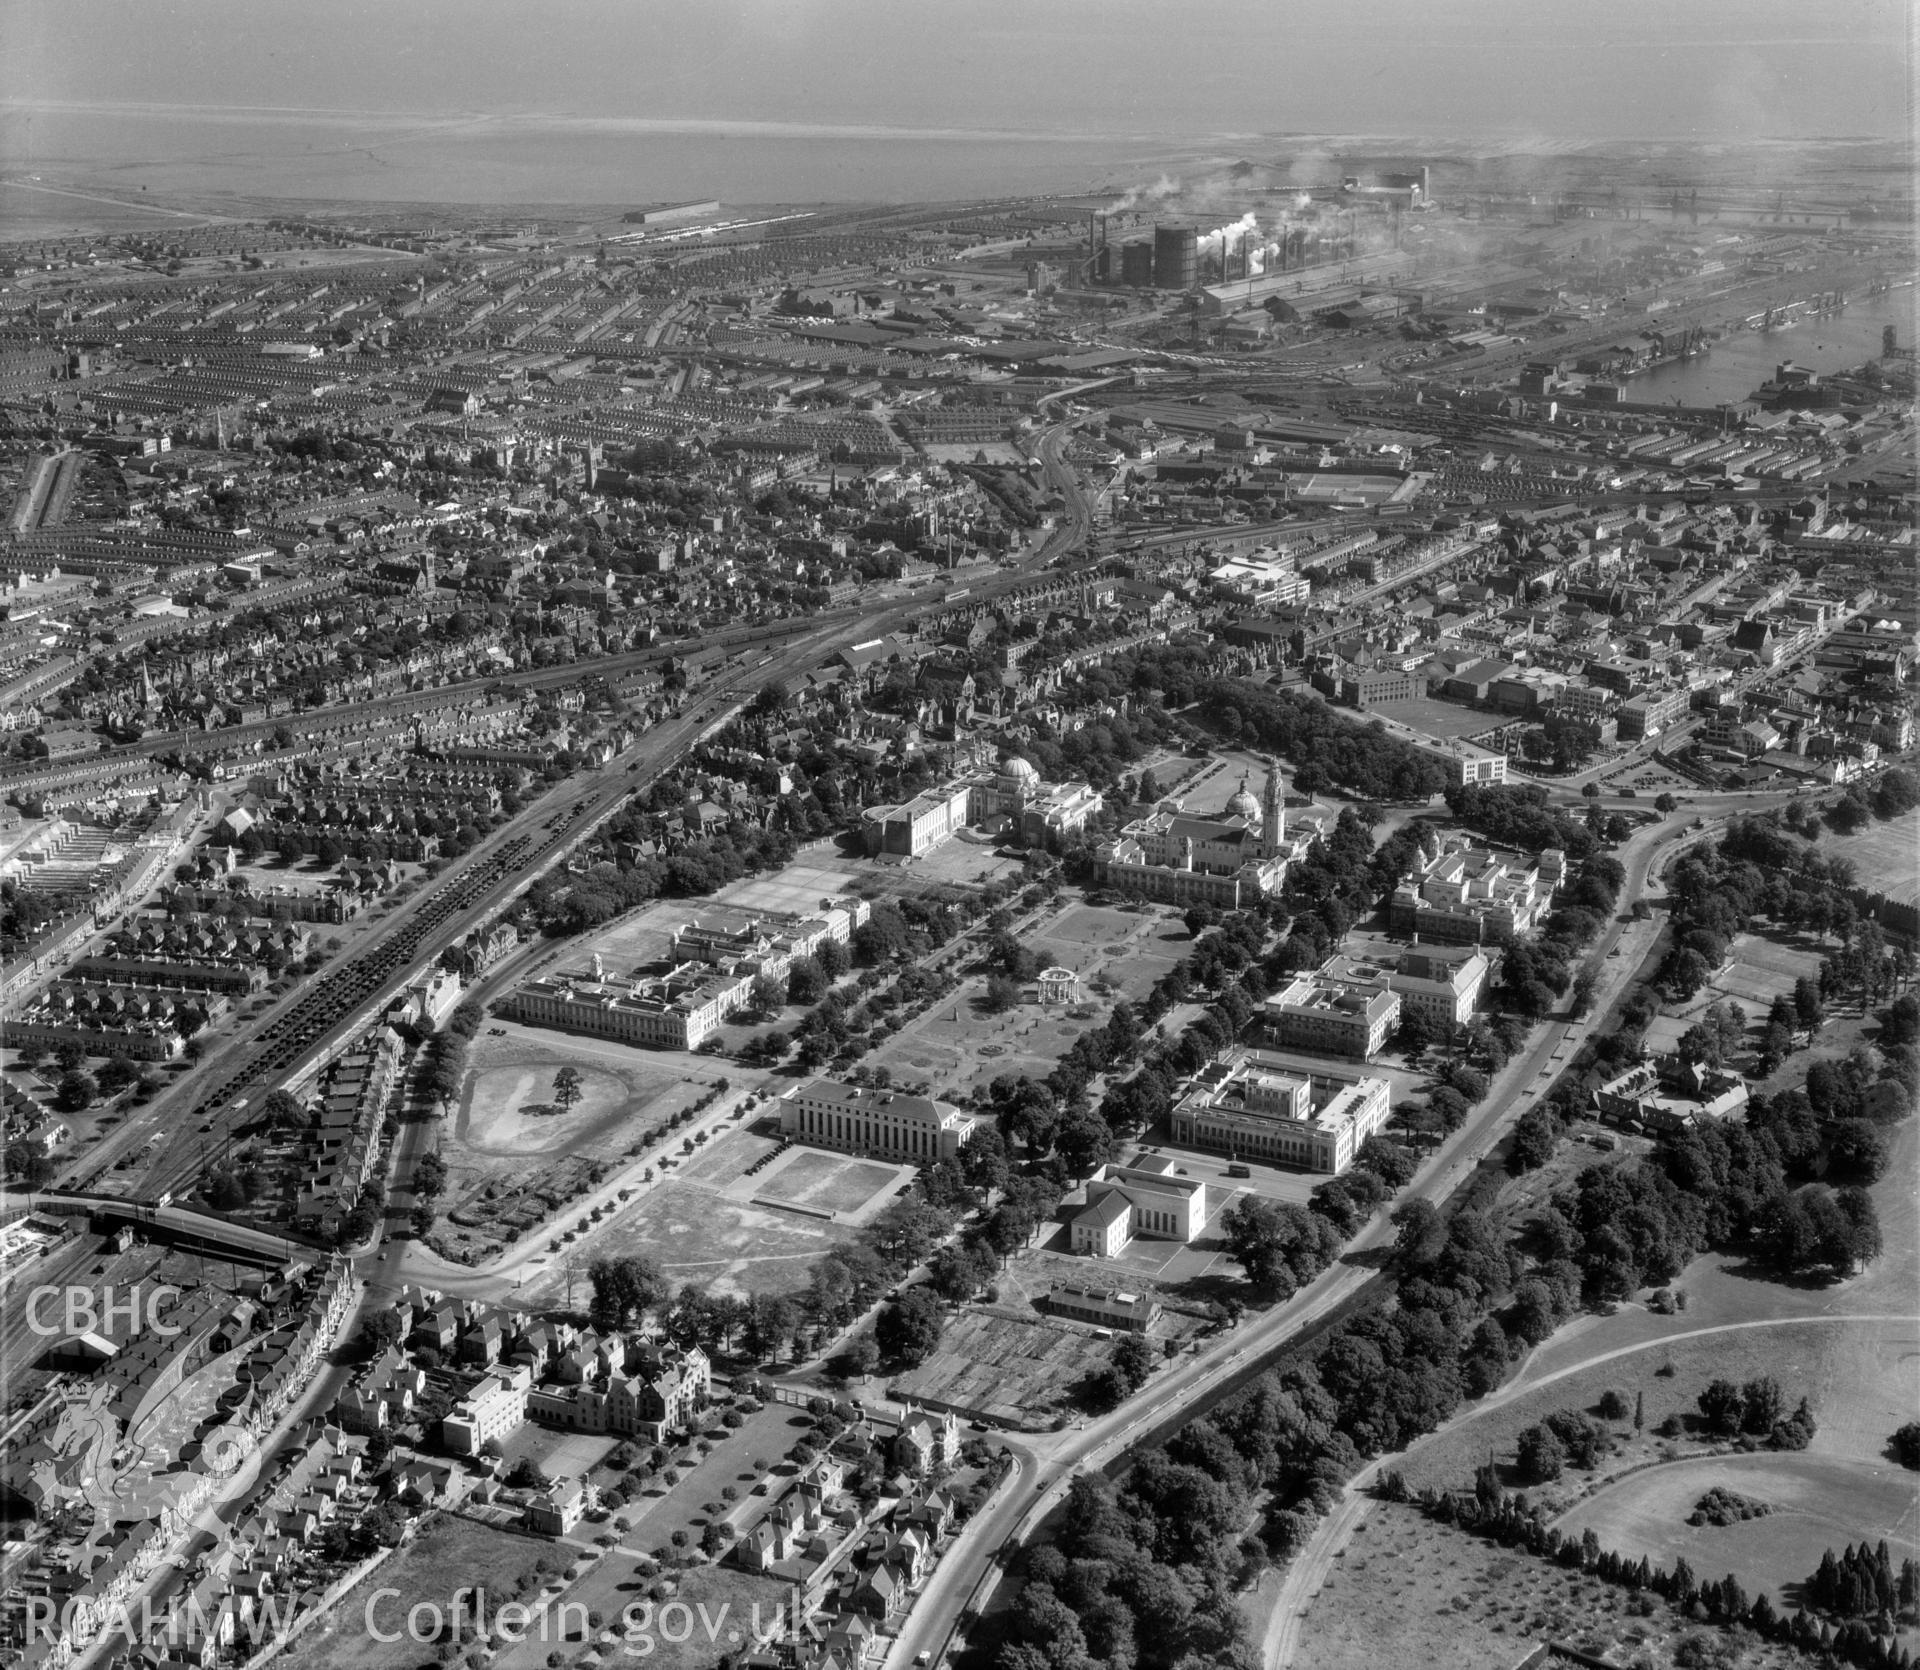 General view of Cardiff